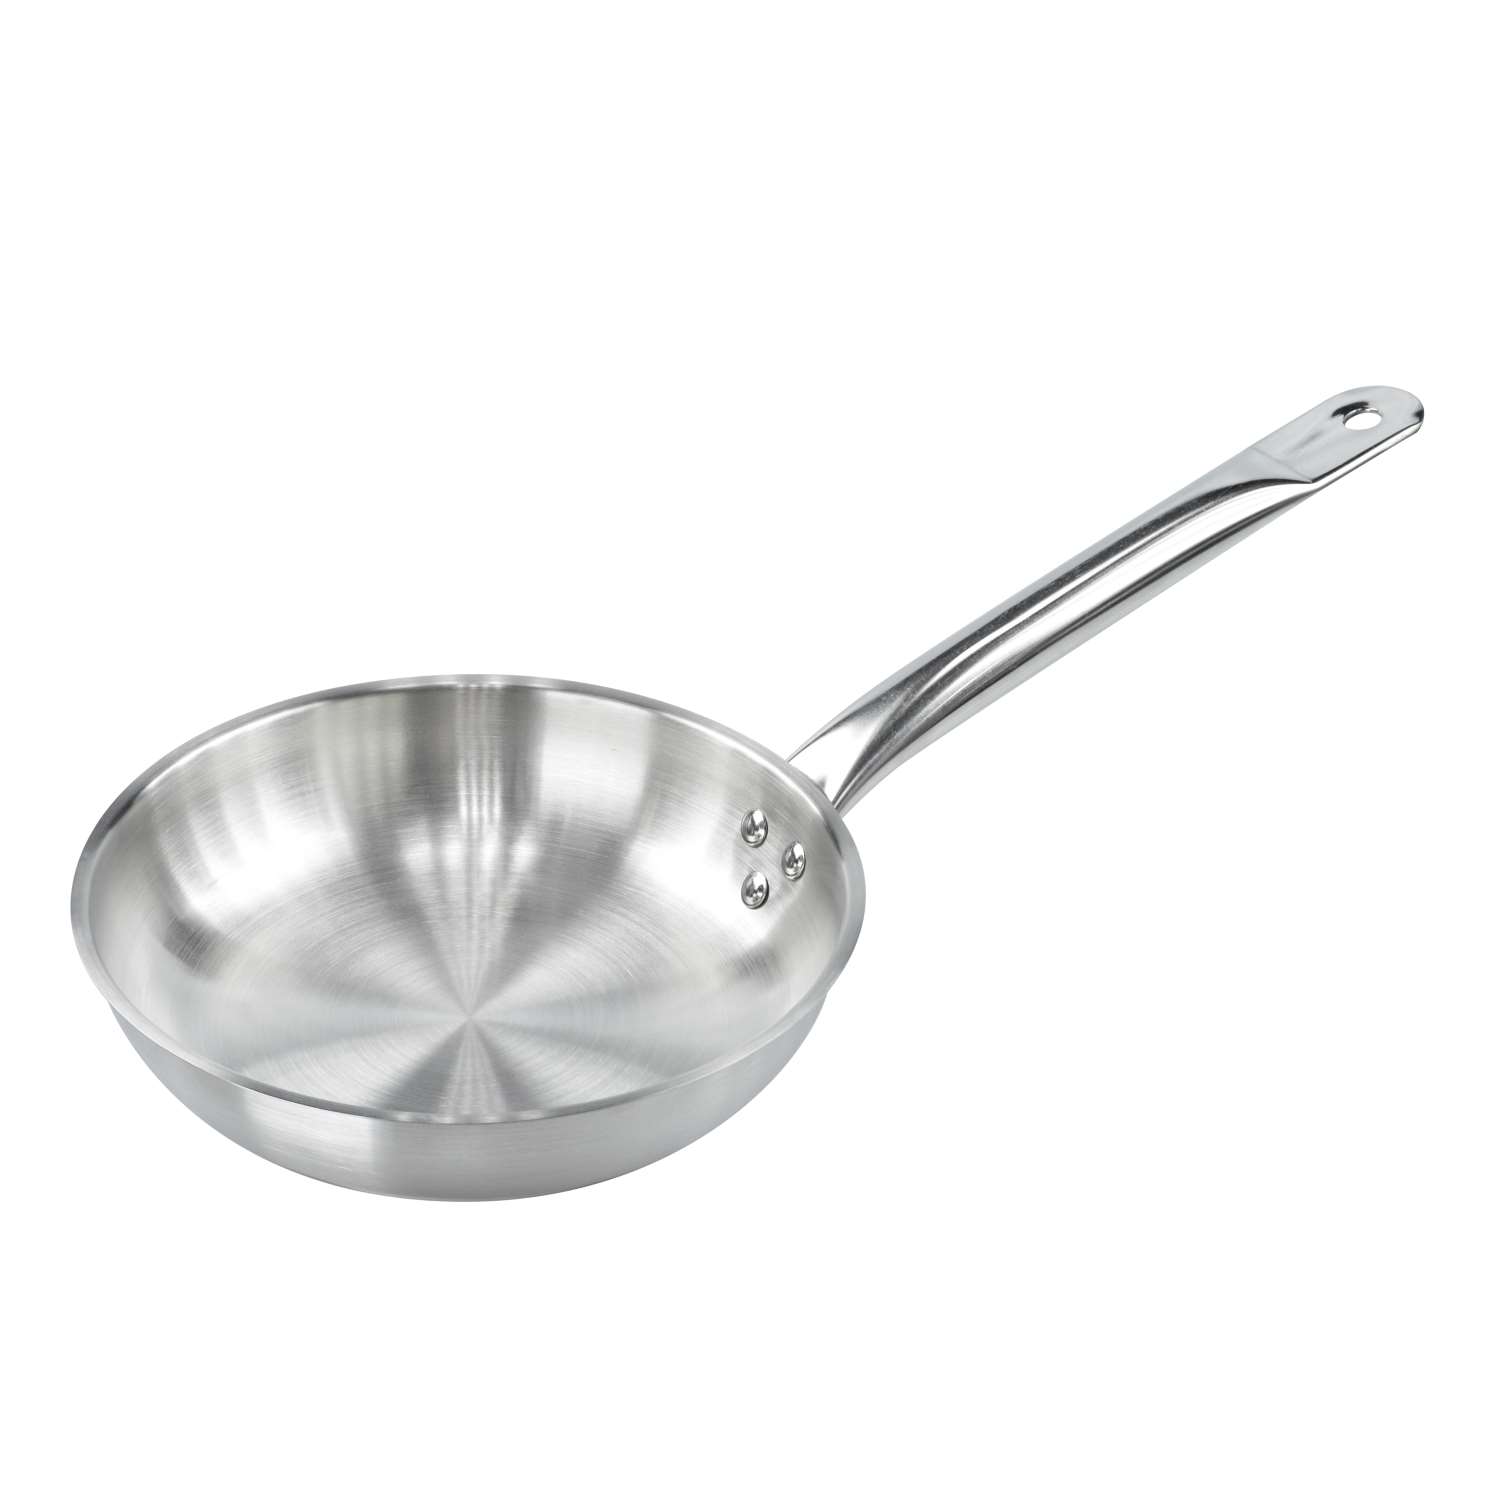 Chefset Steel Fry Pan Without Cover 30 Cm